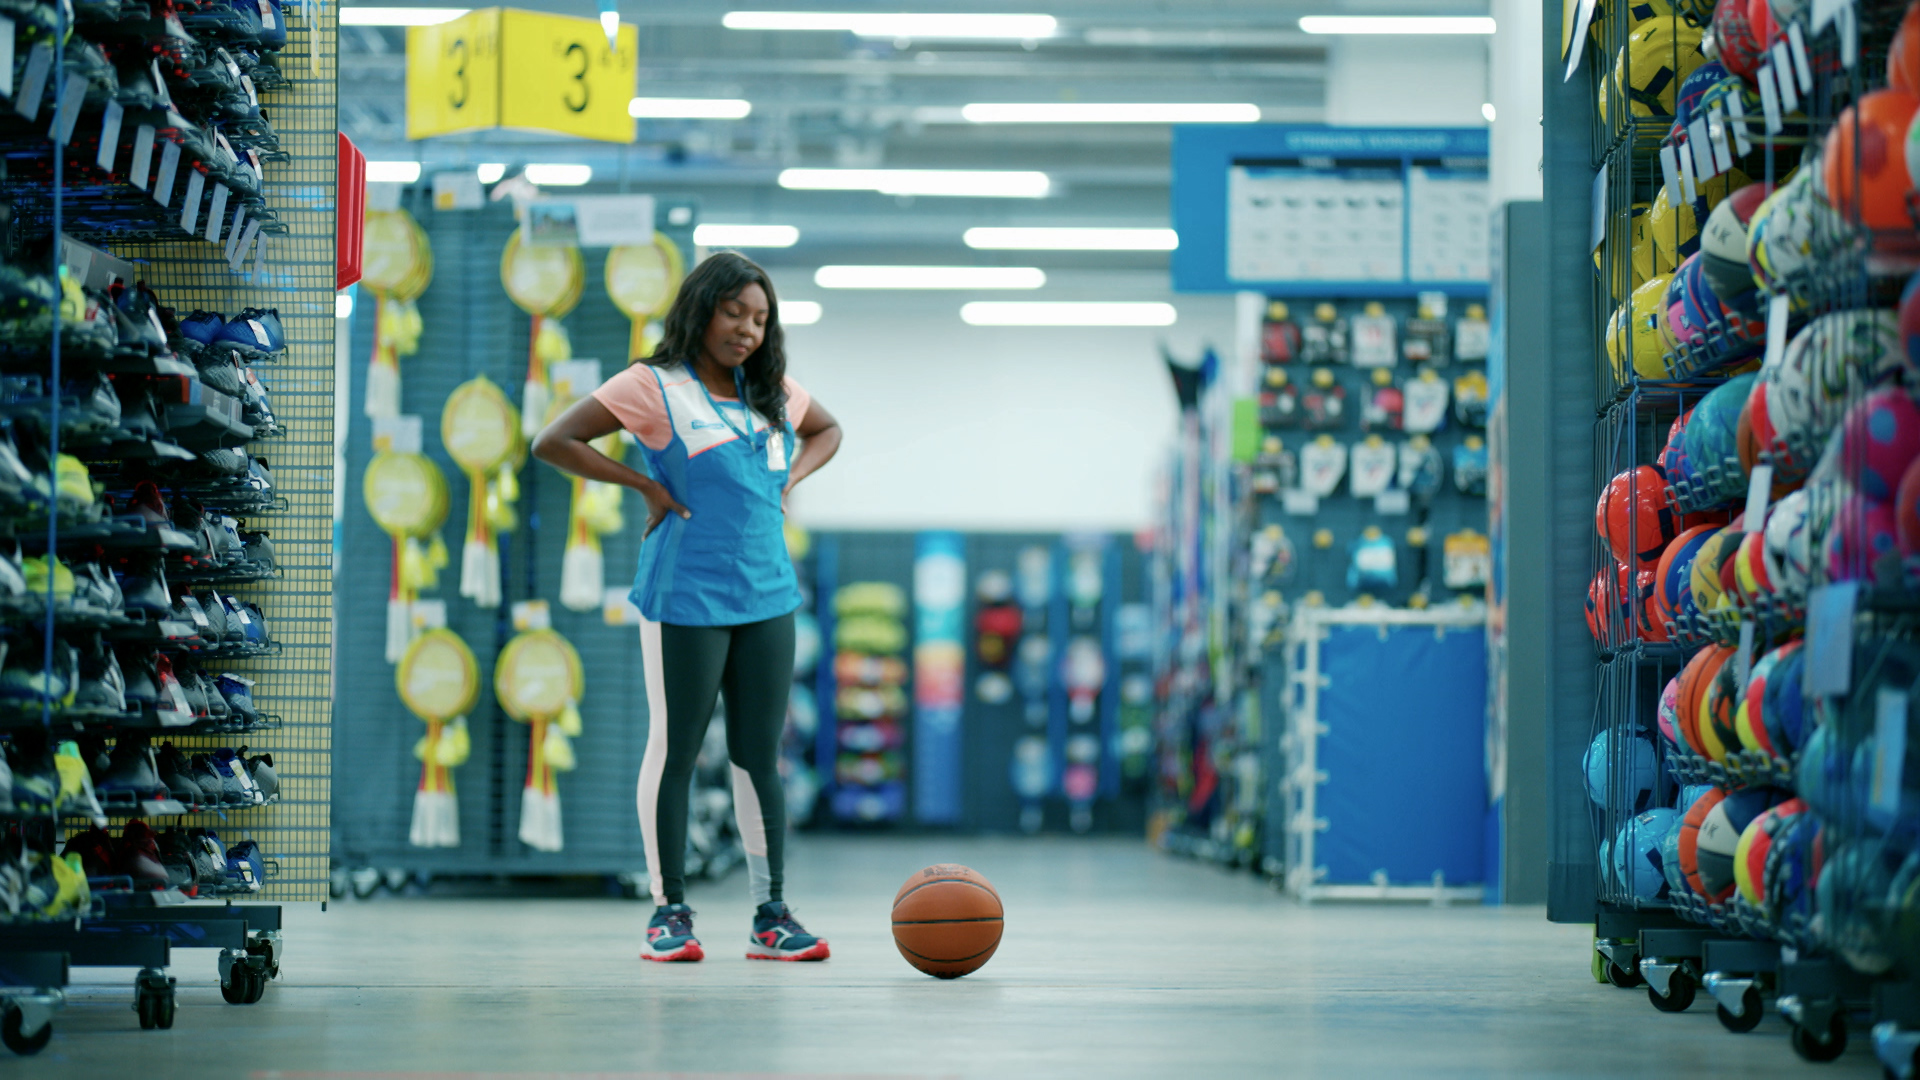 Decathlon USA Retail Sporting Goods Advertising Campaign